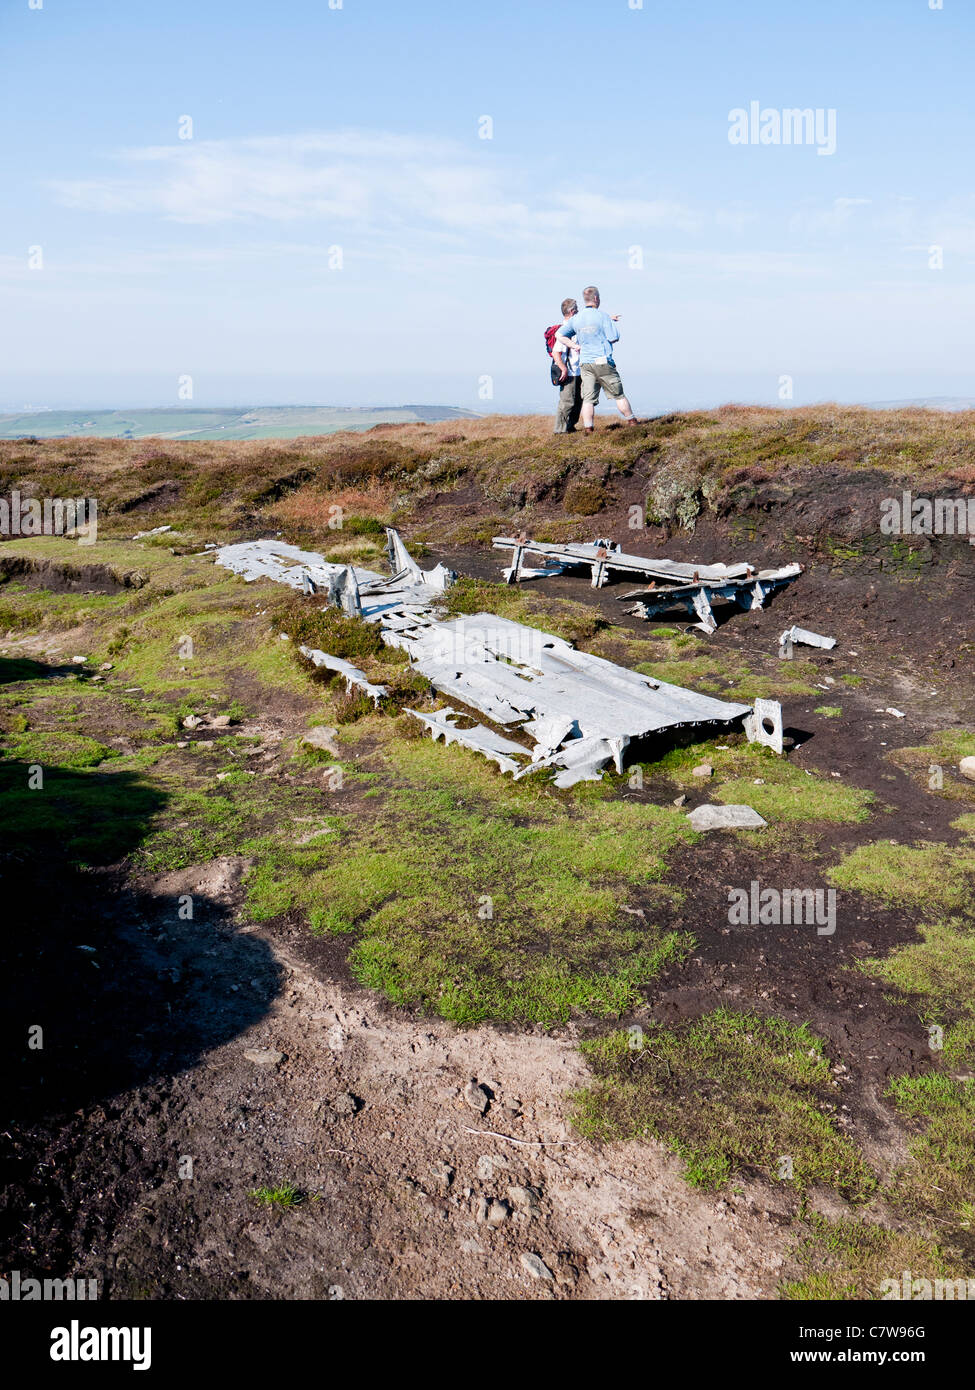 Two men discussing the wreck of a Liberator, Mill Hill, High Peak, Derbyshire, England, UK. Stock Photo